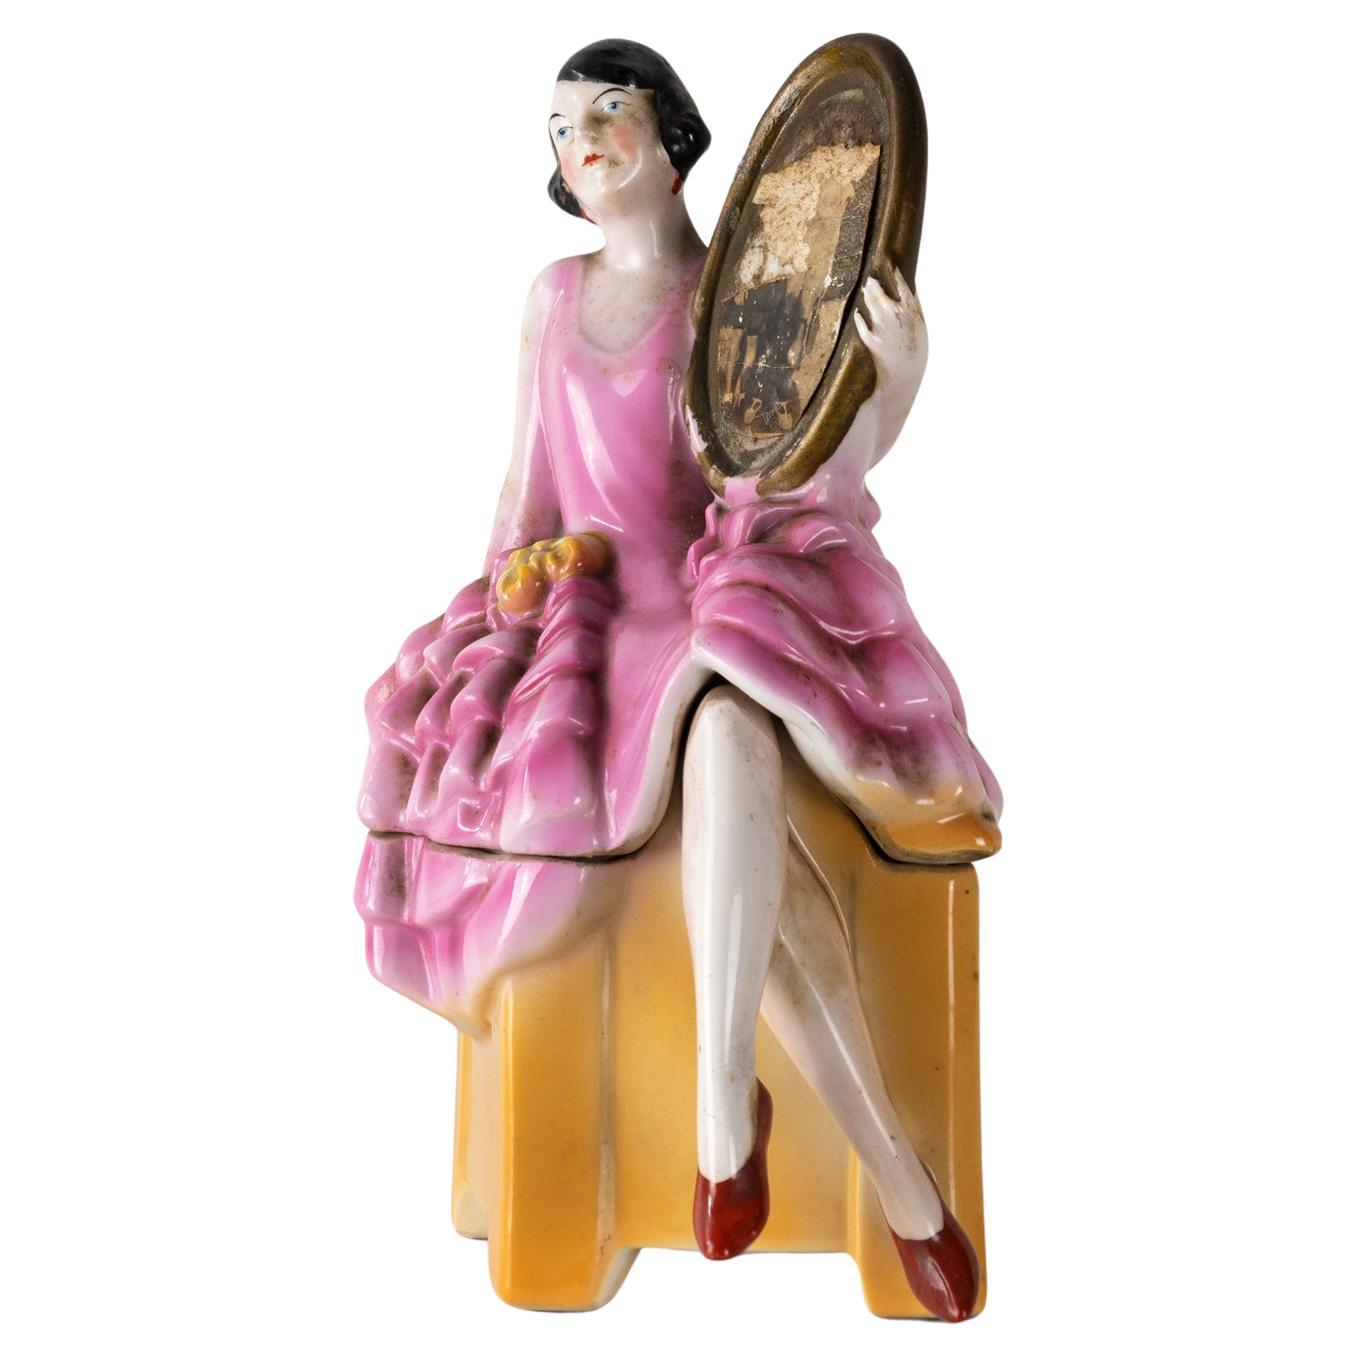 A 1930's Art Deco German ceramic powder box /  Jewelry Box in the form of an Art Deco hat box with a flapper girl sitting on the lid holding a mirror.   
Beautiful colouring and detailing piece.
A rare design in great condition.

